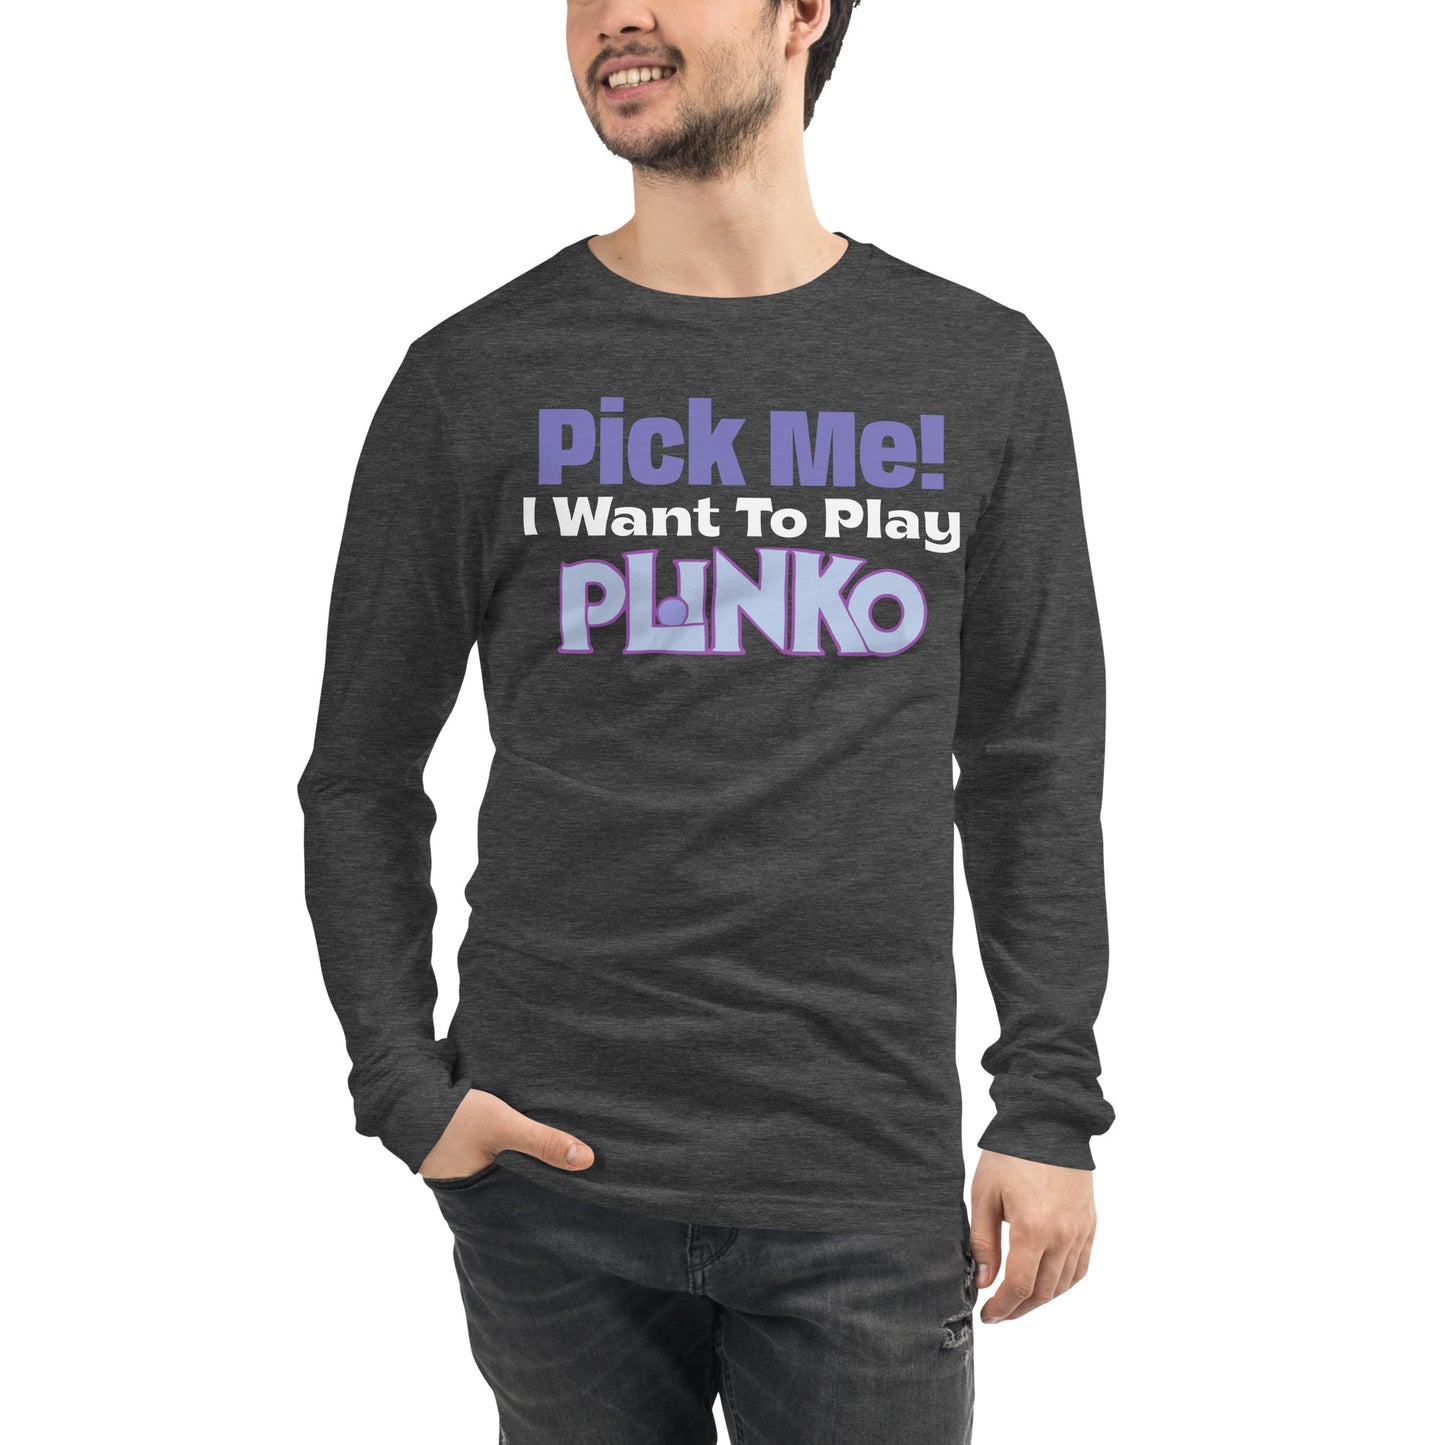 Unisex Long Sleeve Tee - Pick Me I Want to Play Plinko on Lets Make a Deal